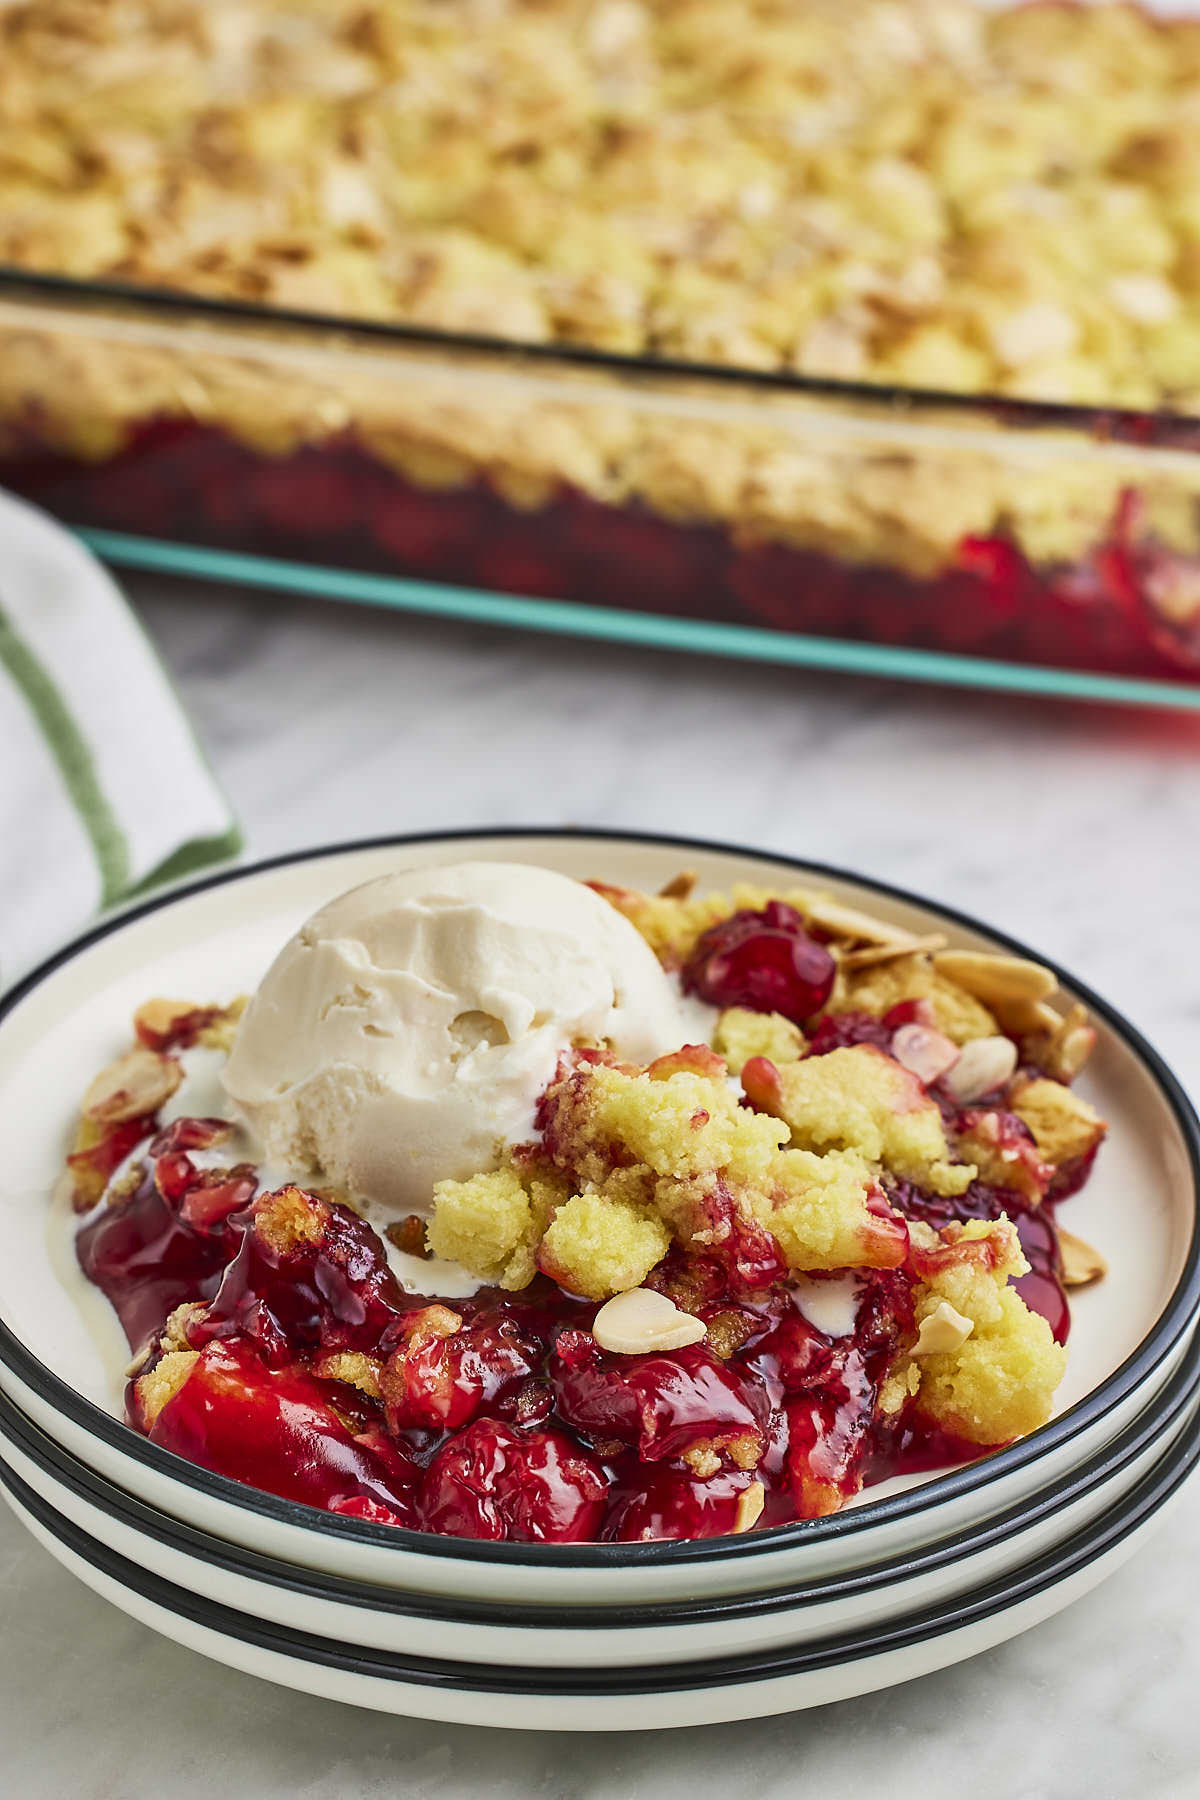 A plate of cranberry crisp with a scoop of ice cream.